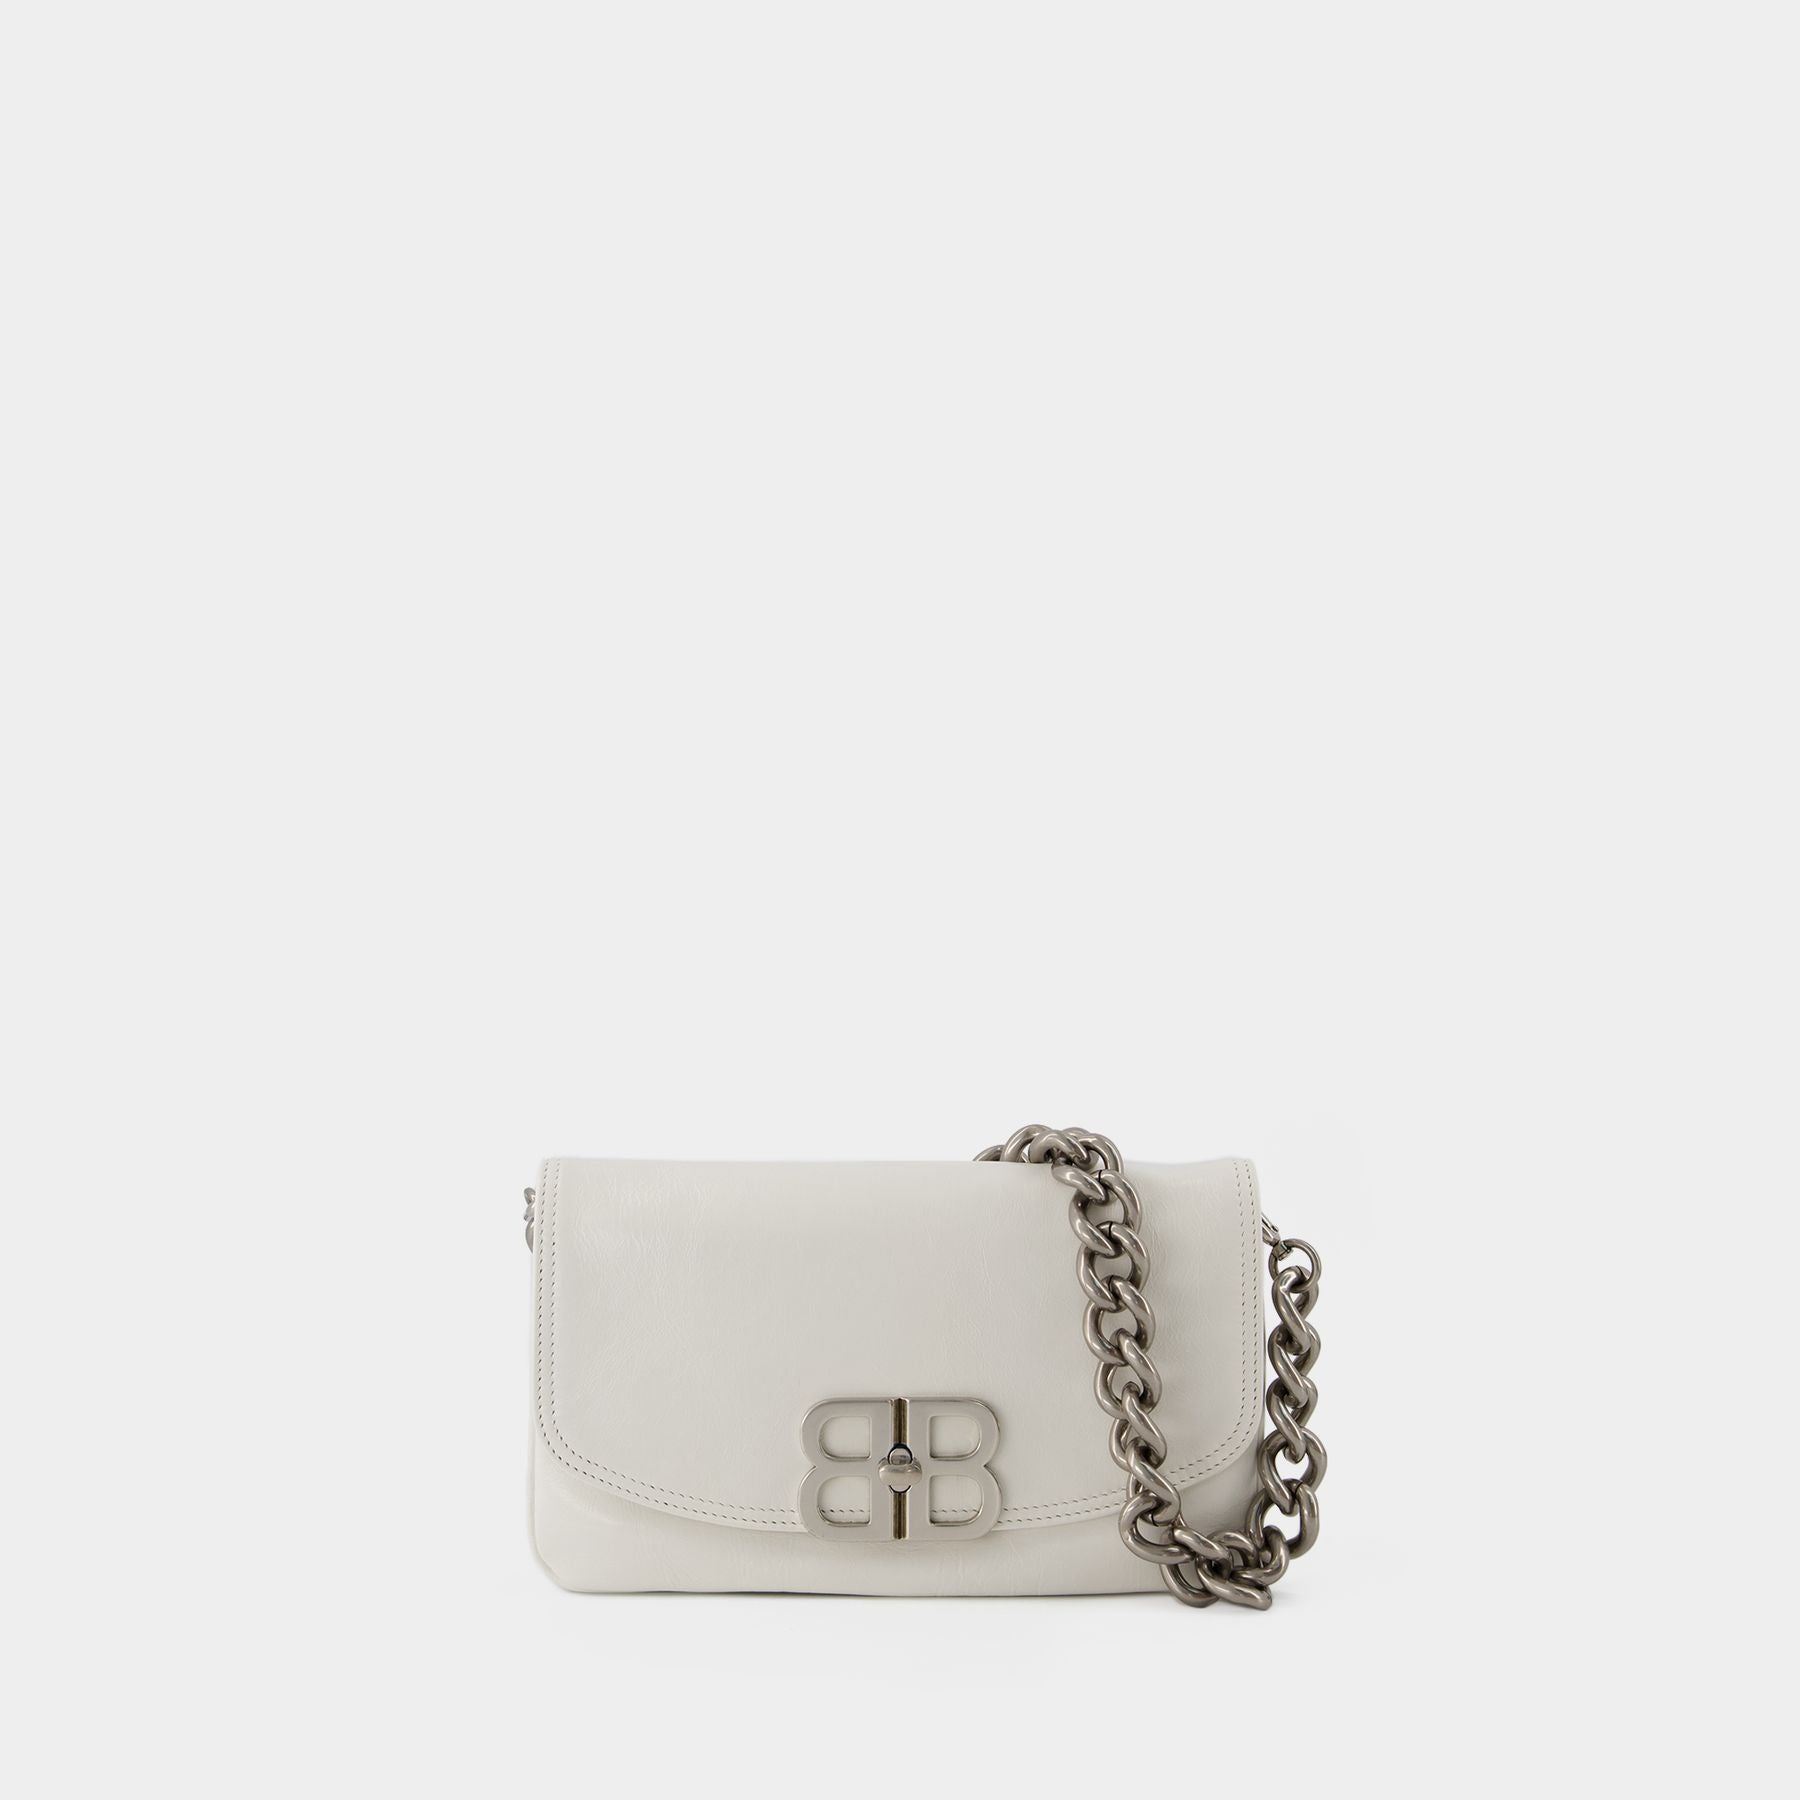 Women's Bb Soft Small Flap Bag in Optic White